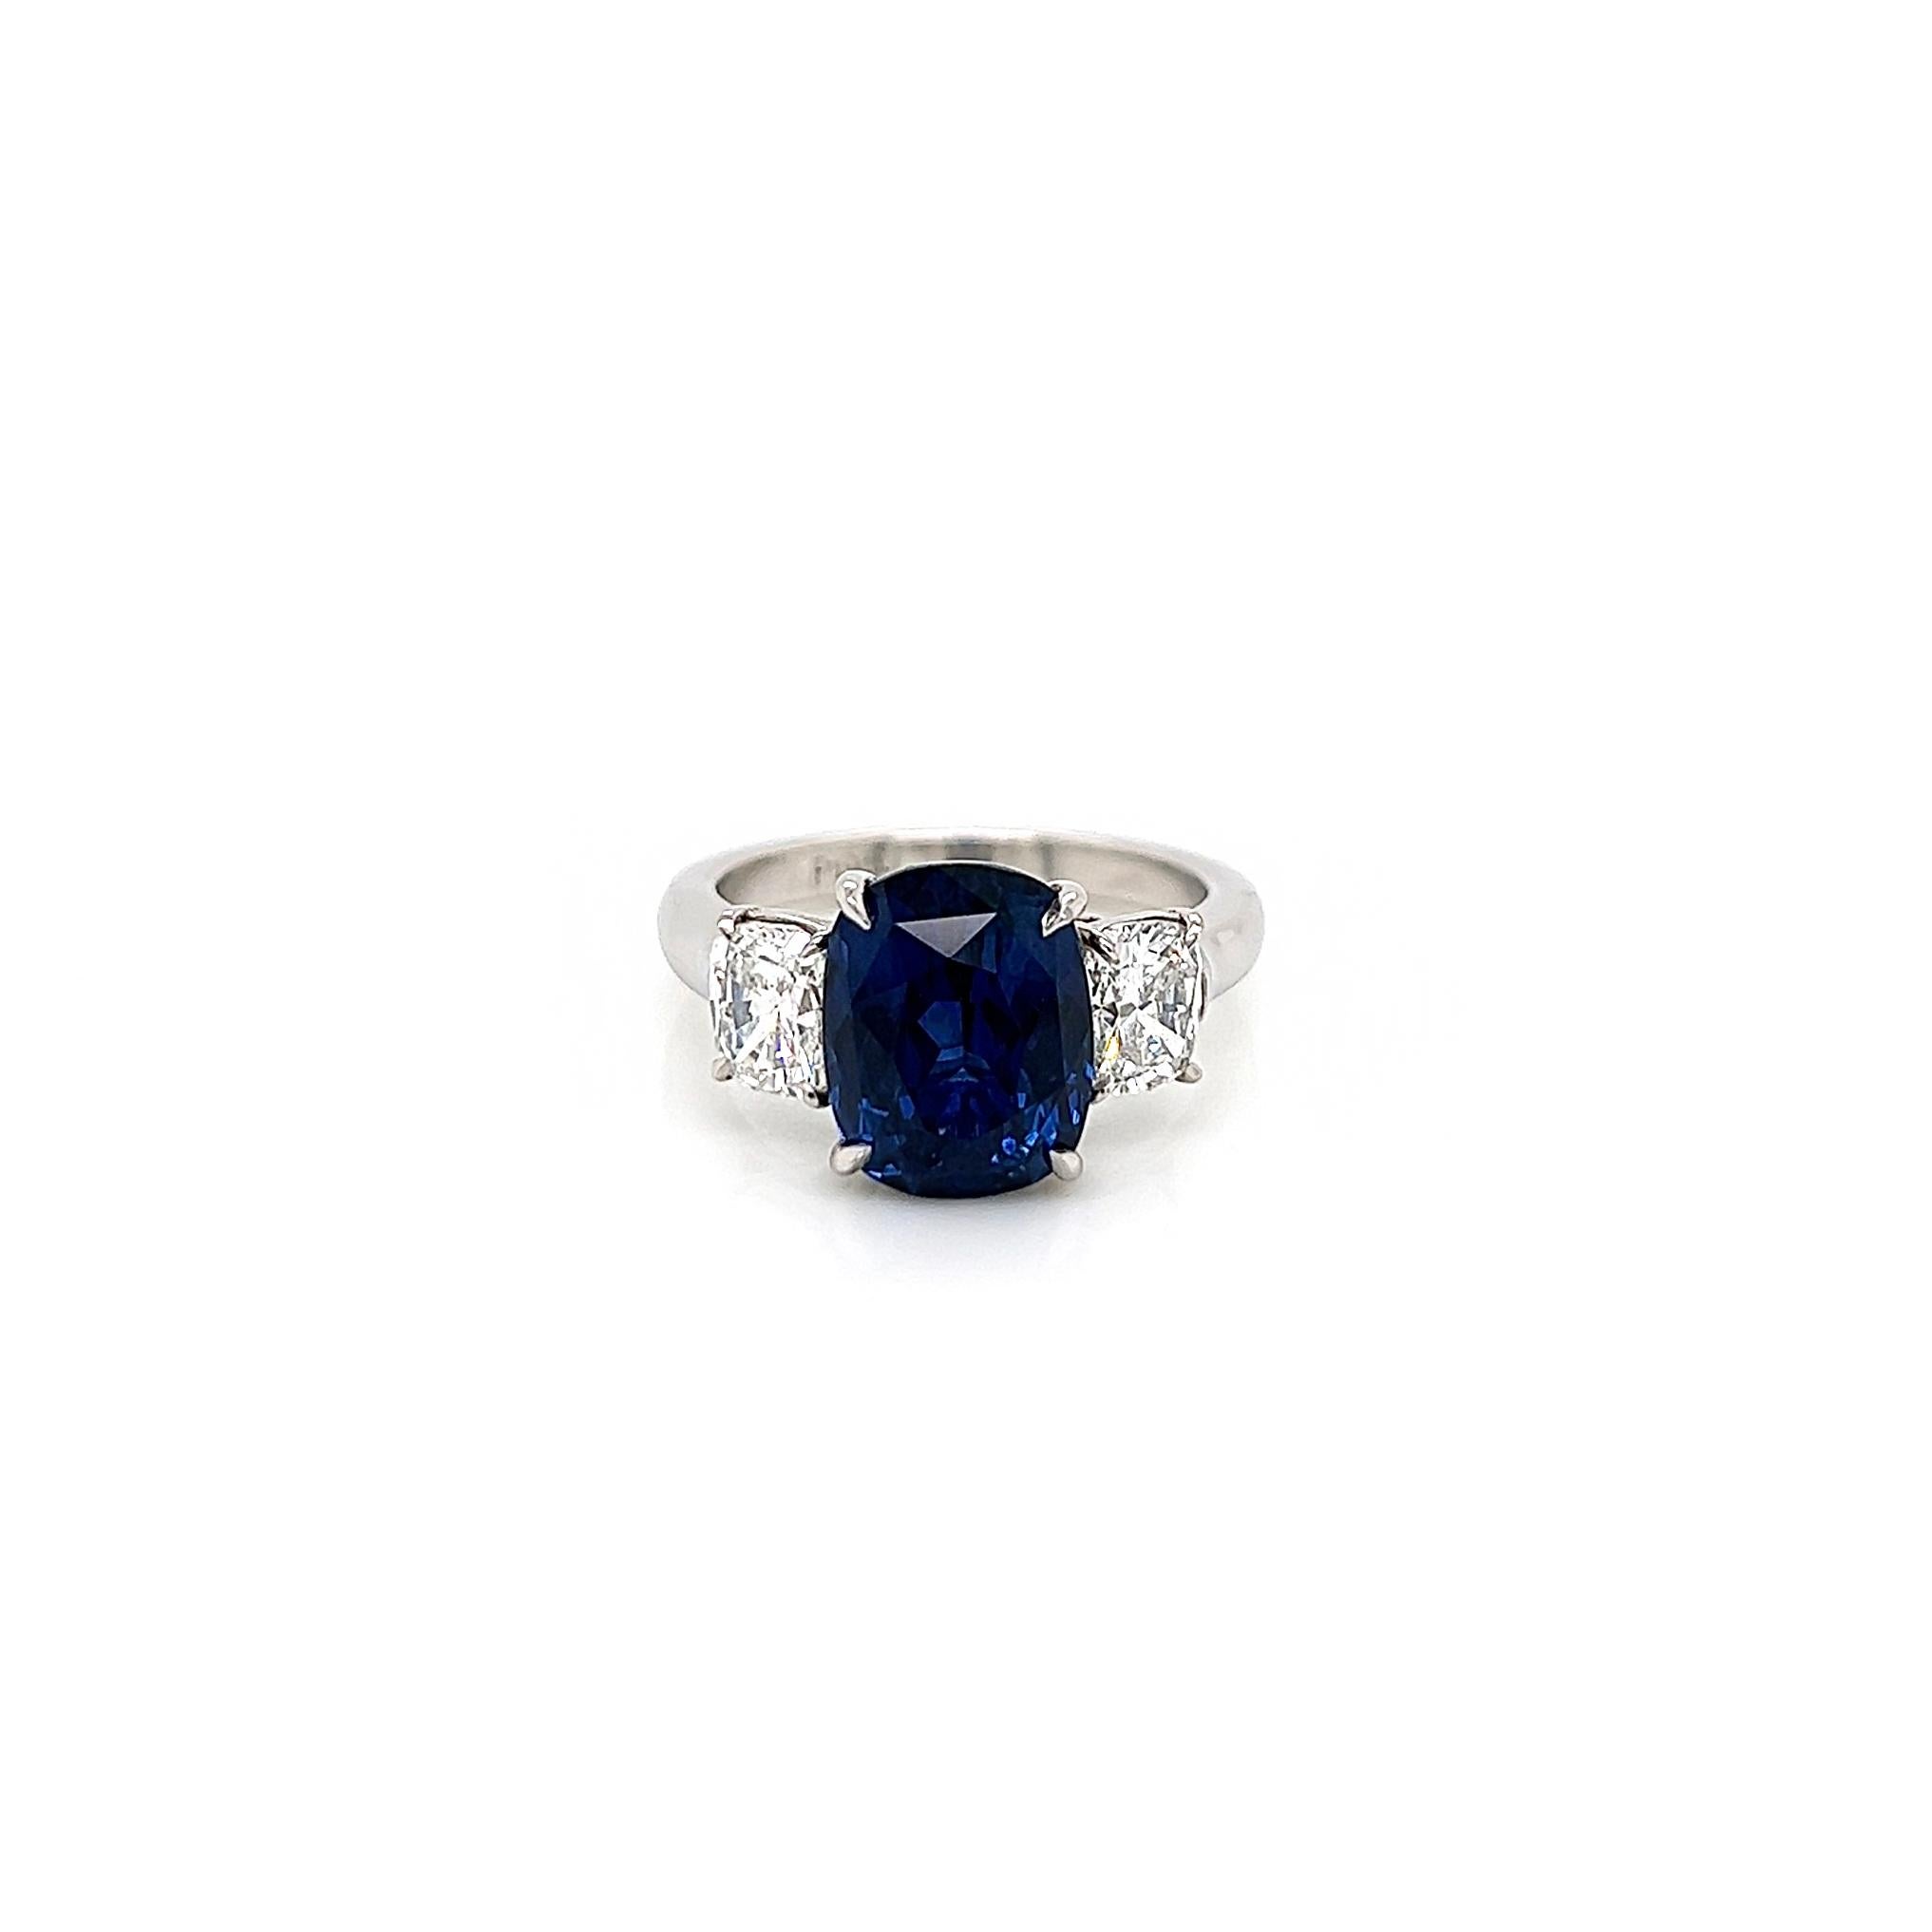 6.47 Total Carat Sapphire and Diamond Three Stone Ladies Ring 

-Metal Type: Platinum
-5.20 Carat Cushion Cut Natural Blue Sapphire
-1.27 Carat Cushion Cut Natural side Diamonds. F-G Color, VS1 Clarity 

-Size 6.25

Made in New York City.